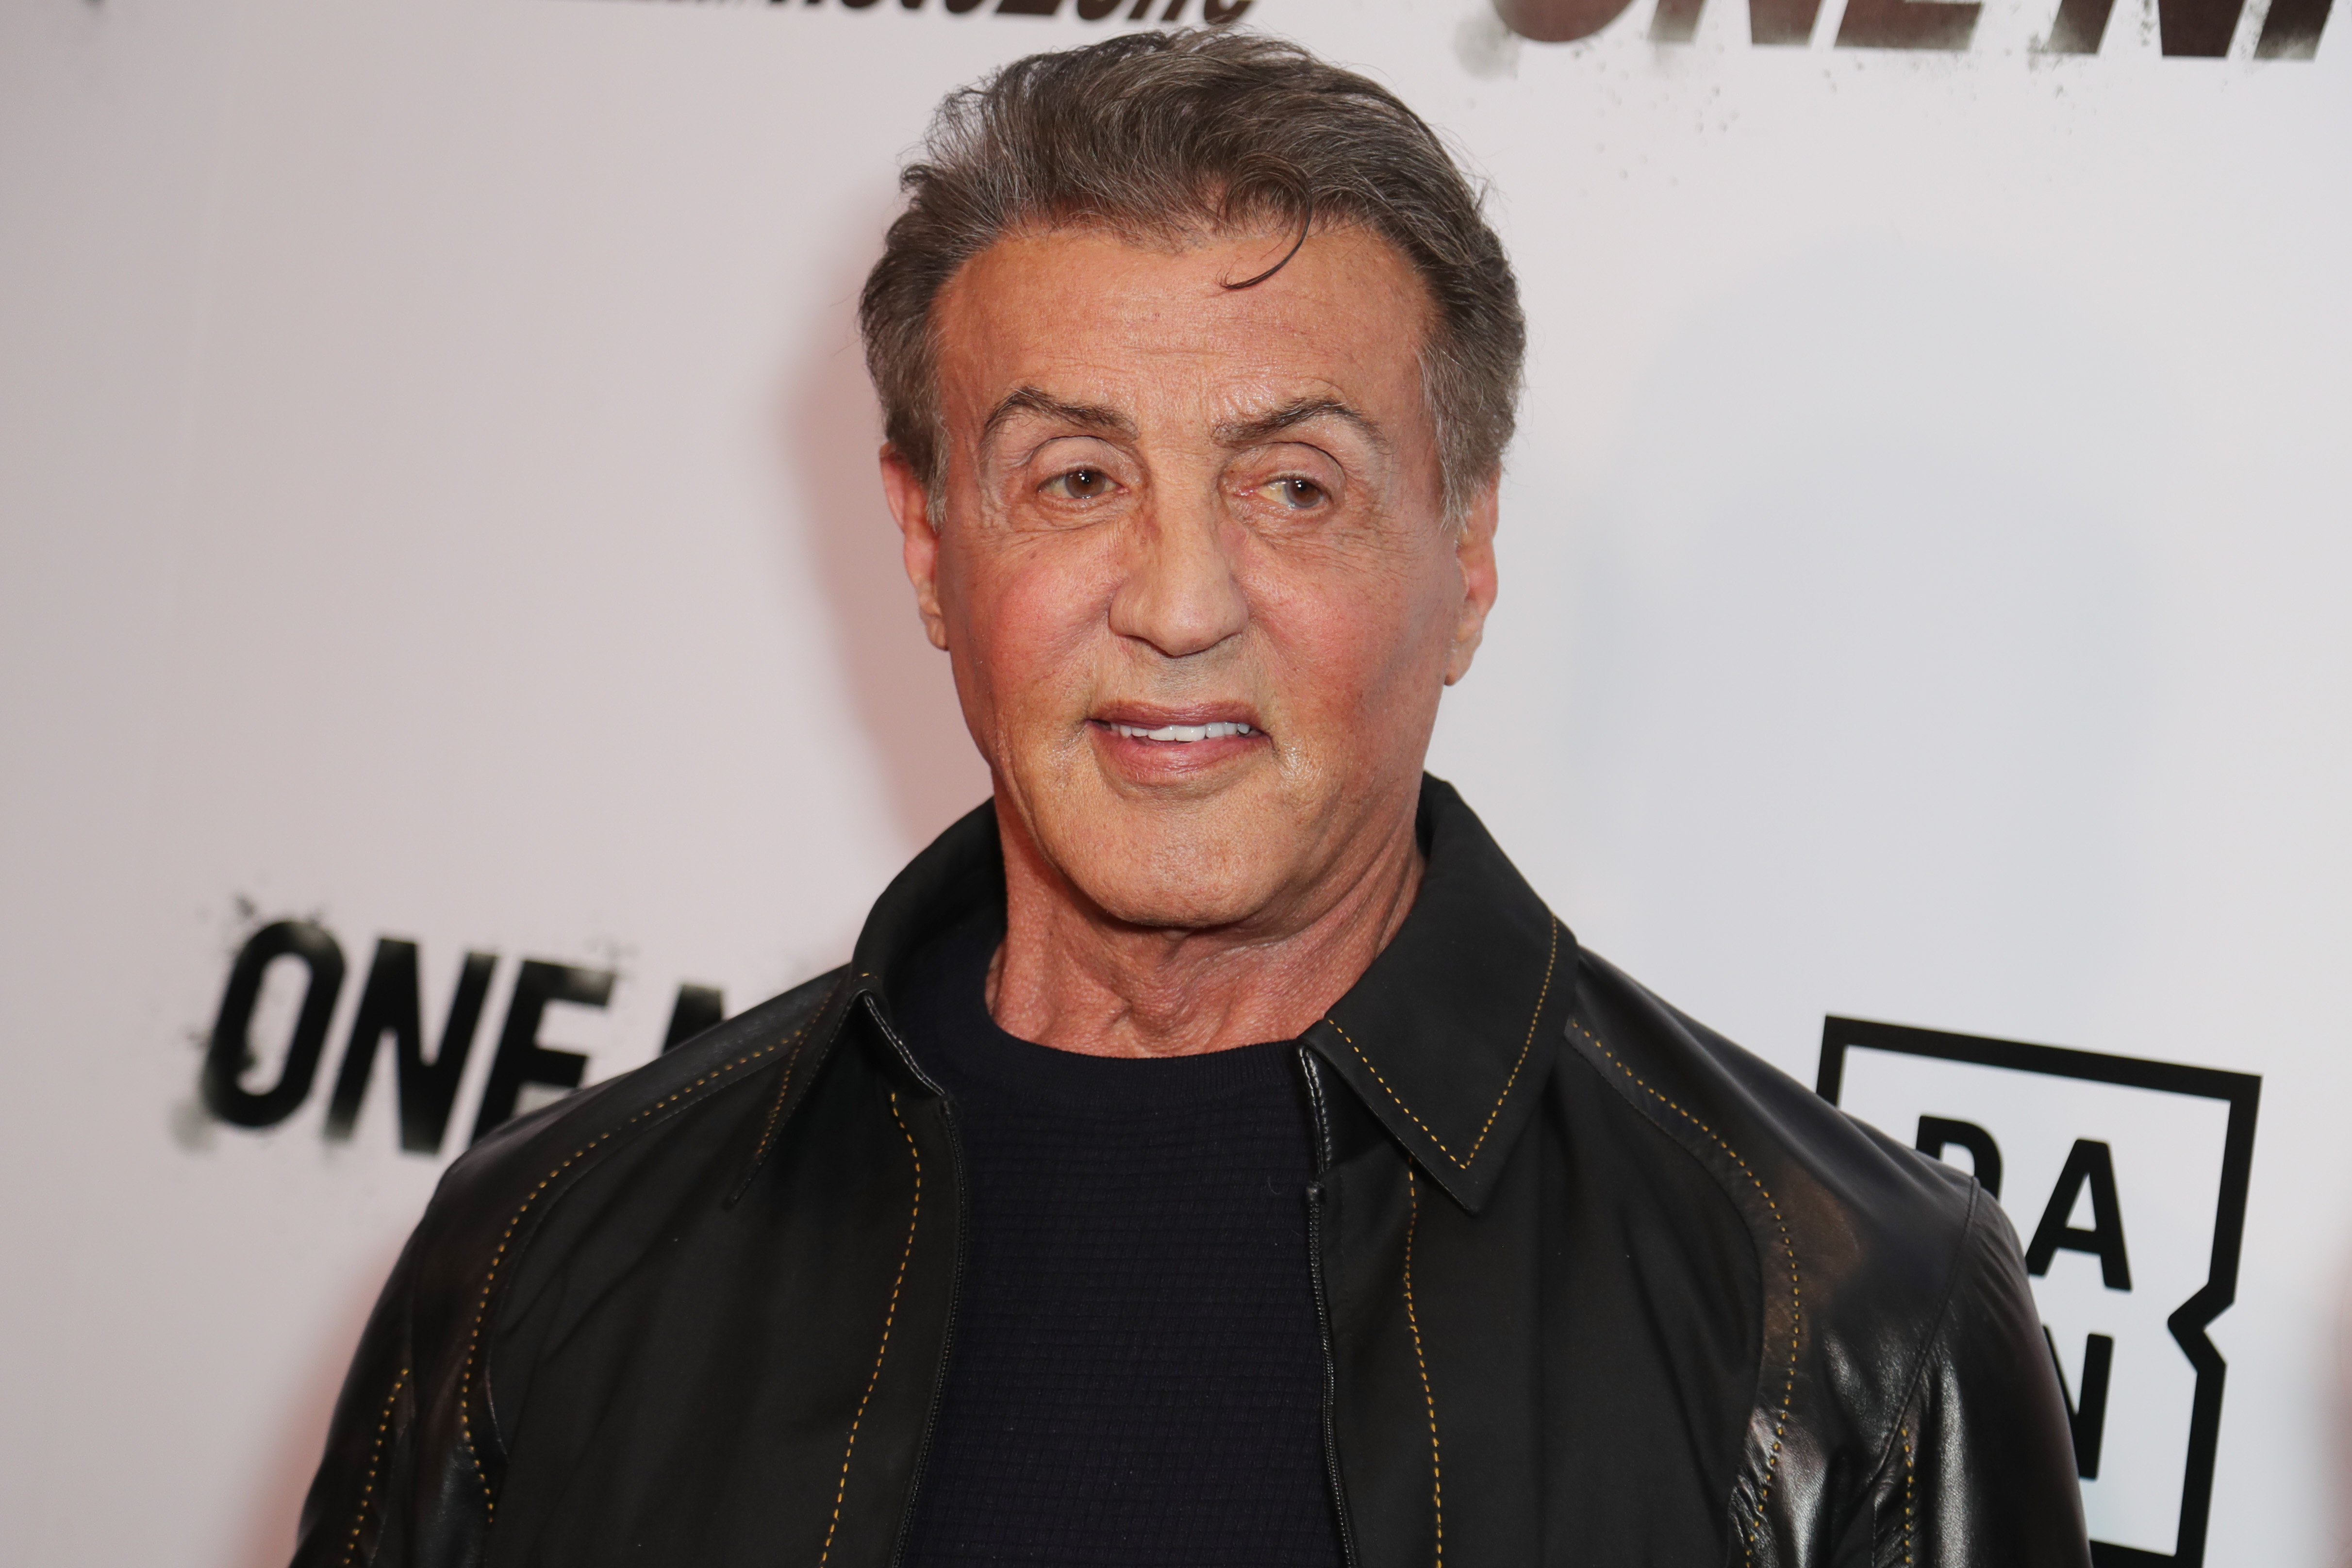 Sylvester Stallone attends Premiere Of "One Night: Joshua Vs. Ruiz" at Writers Guild Theater on November 21, 2019 in Beverly Hills, California. | Source: Getty Images